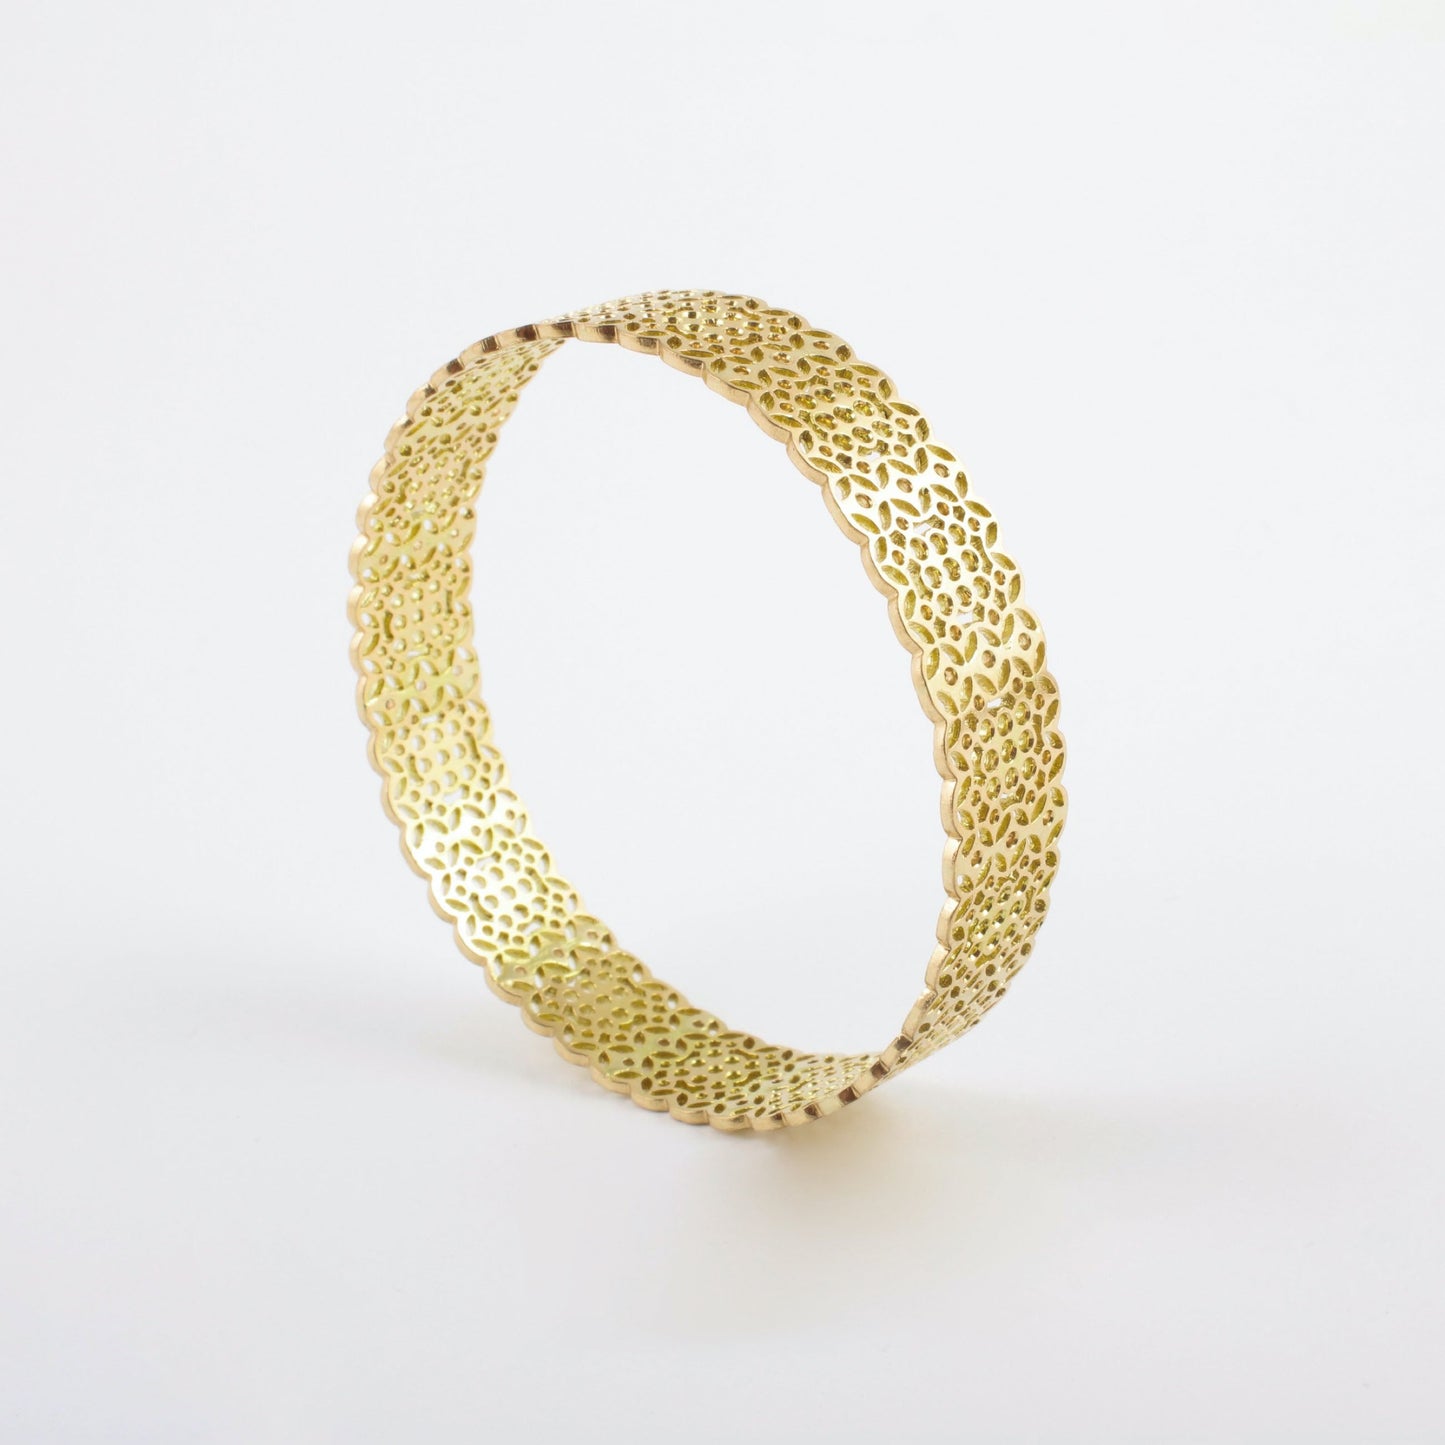 The Lace Series Gold Bangle by Rasvihar